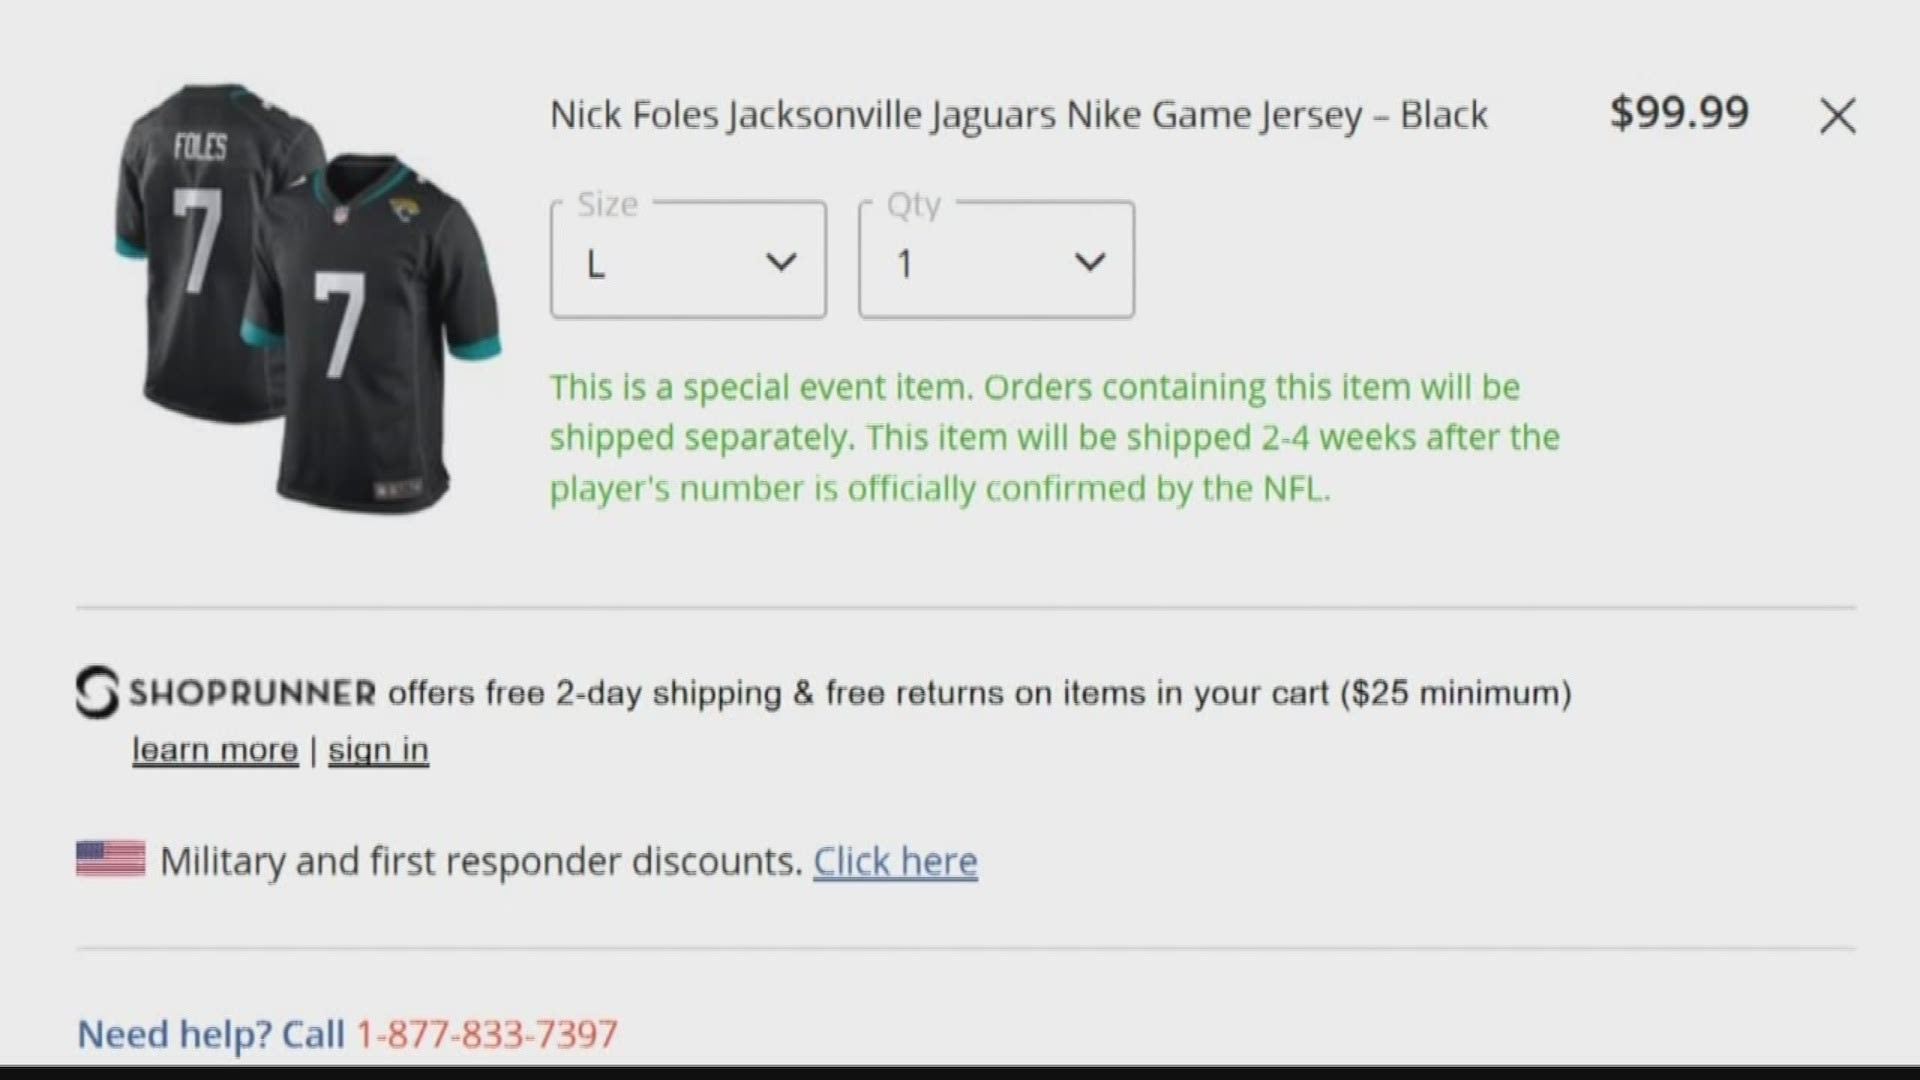 Foles wears no. 7 on the jersey but no. 2 when it comes to online sales.